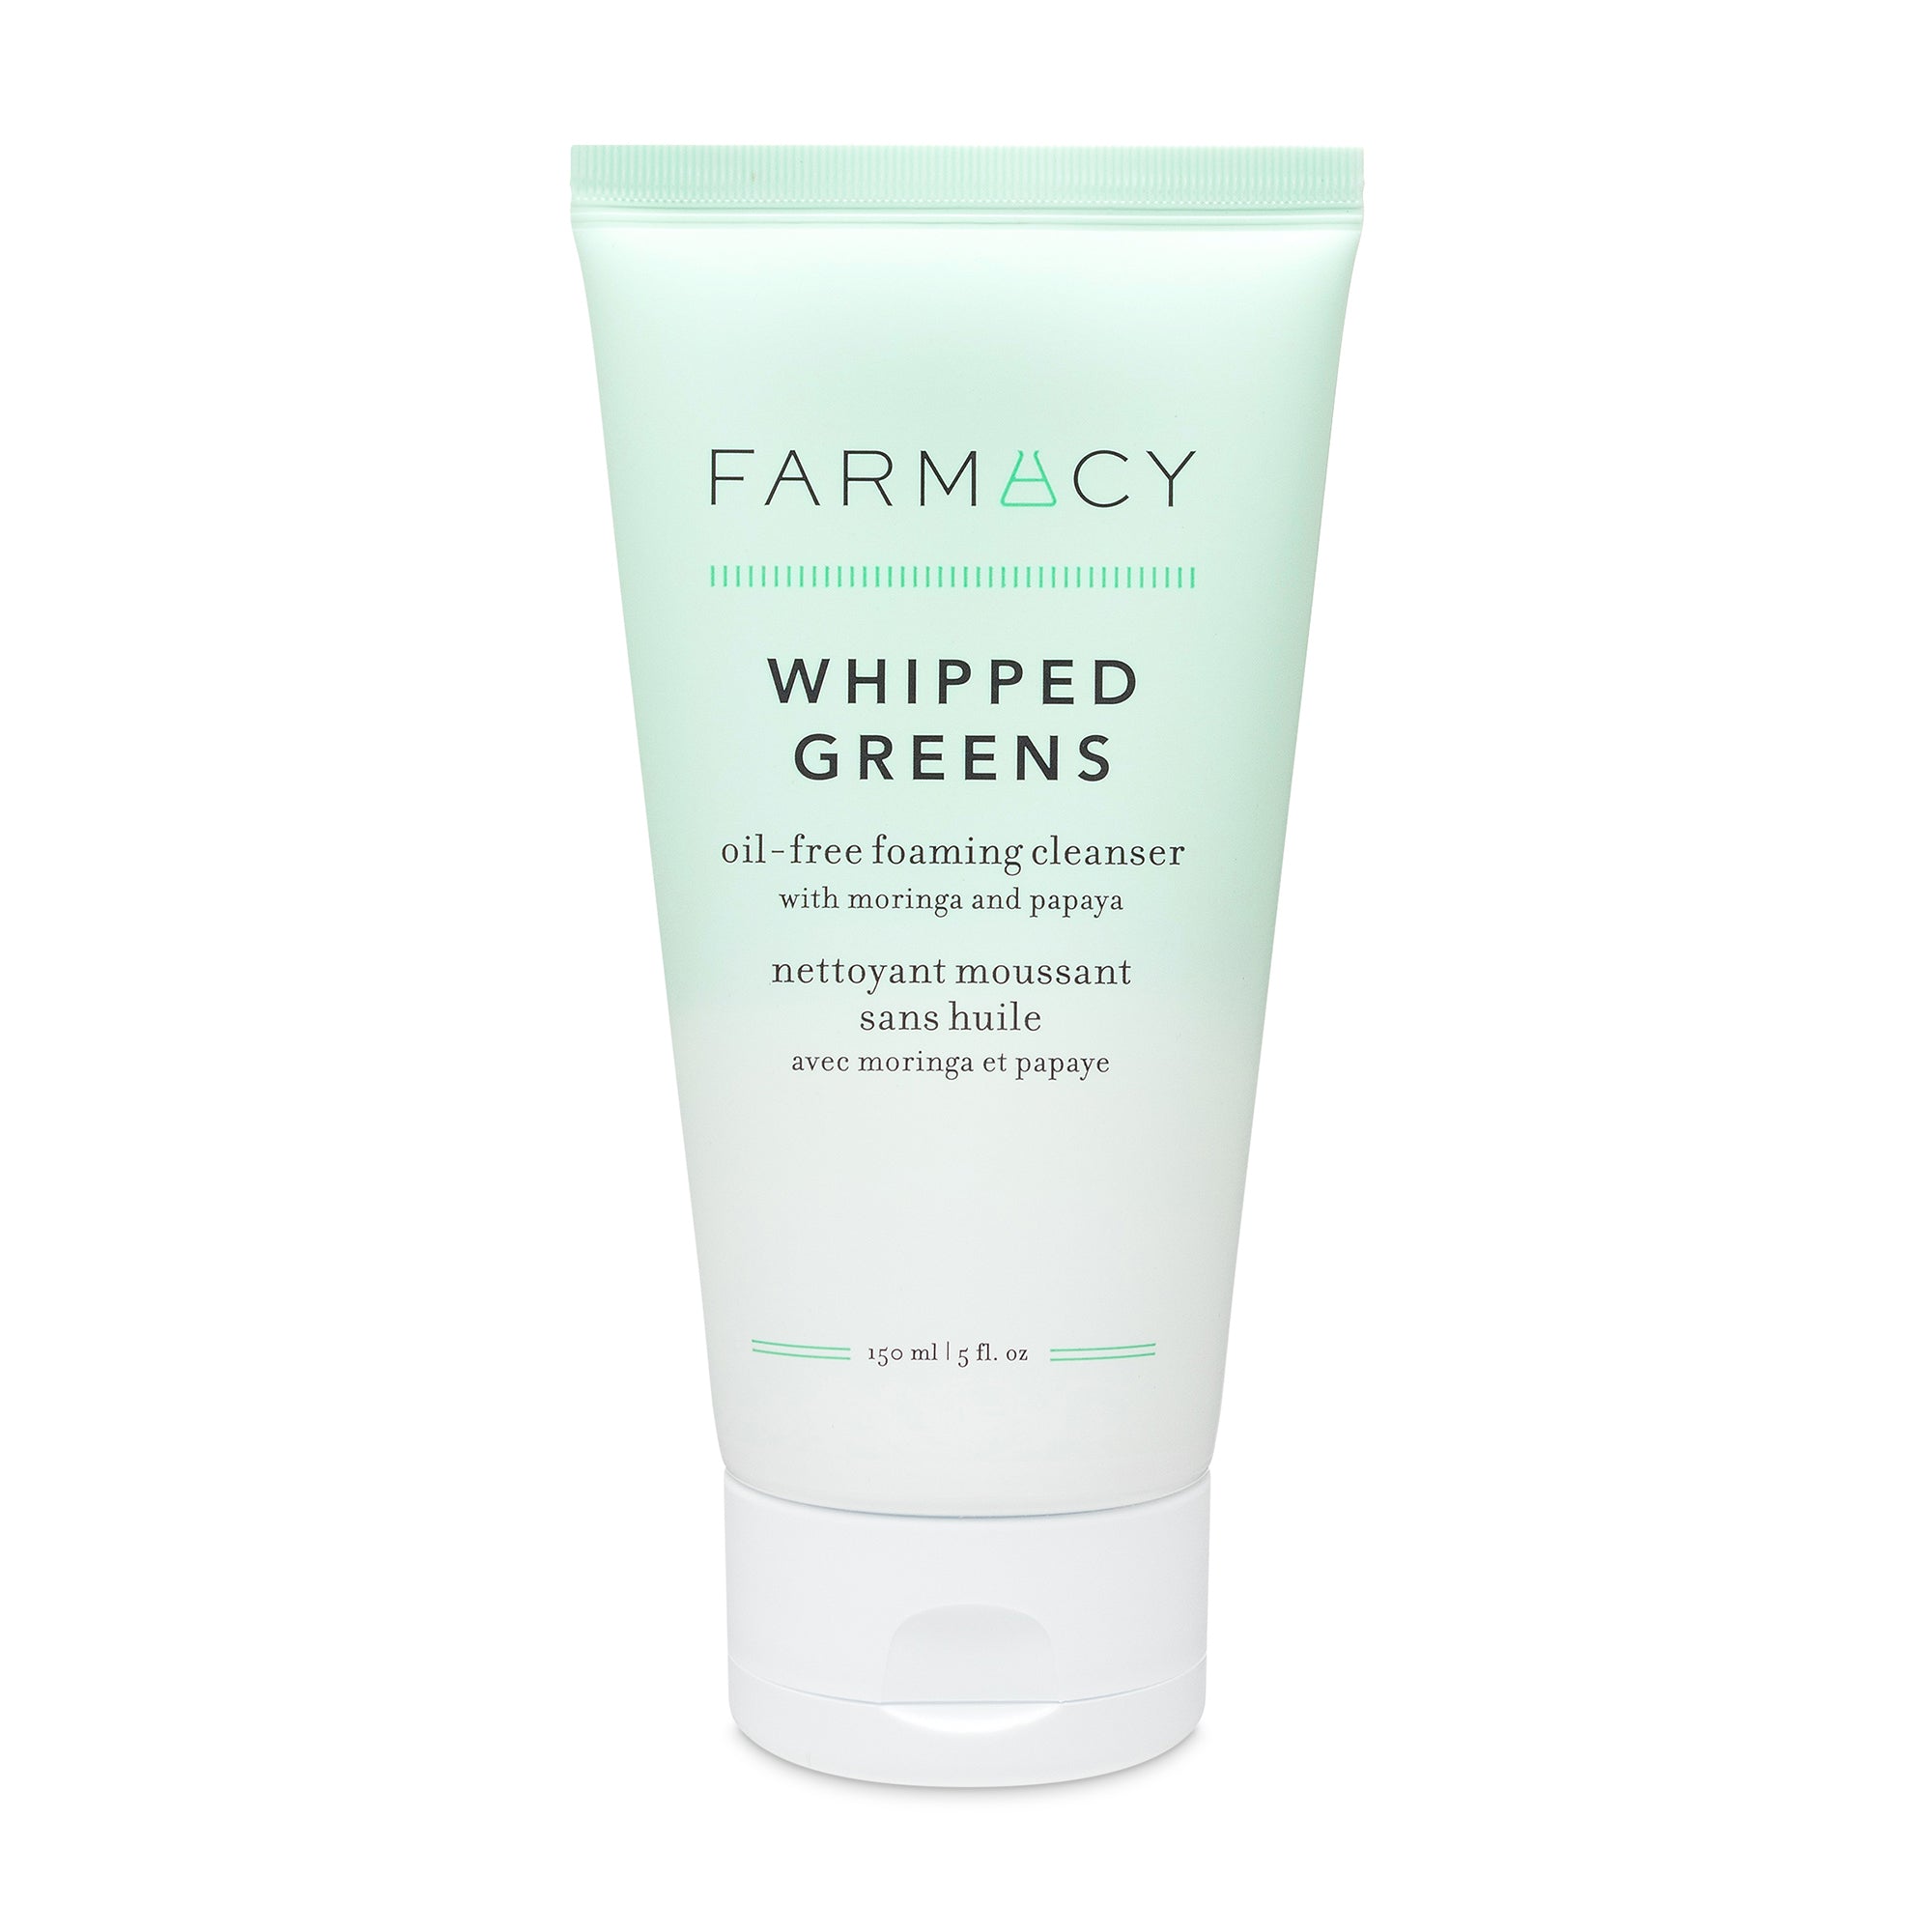 Whipped Greens (bundle item)